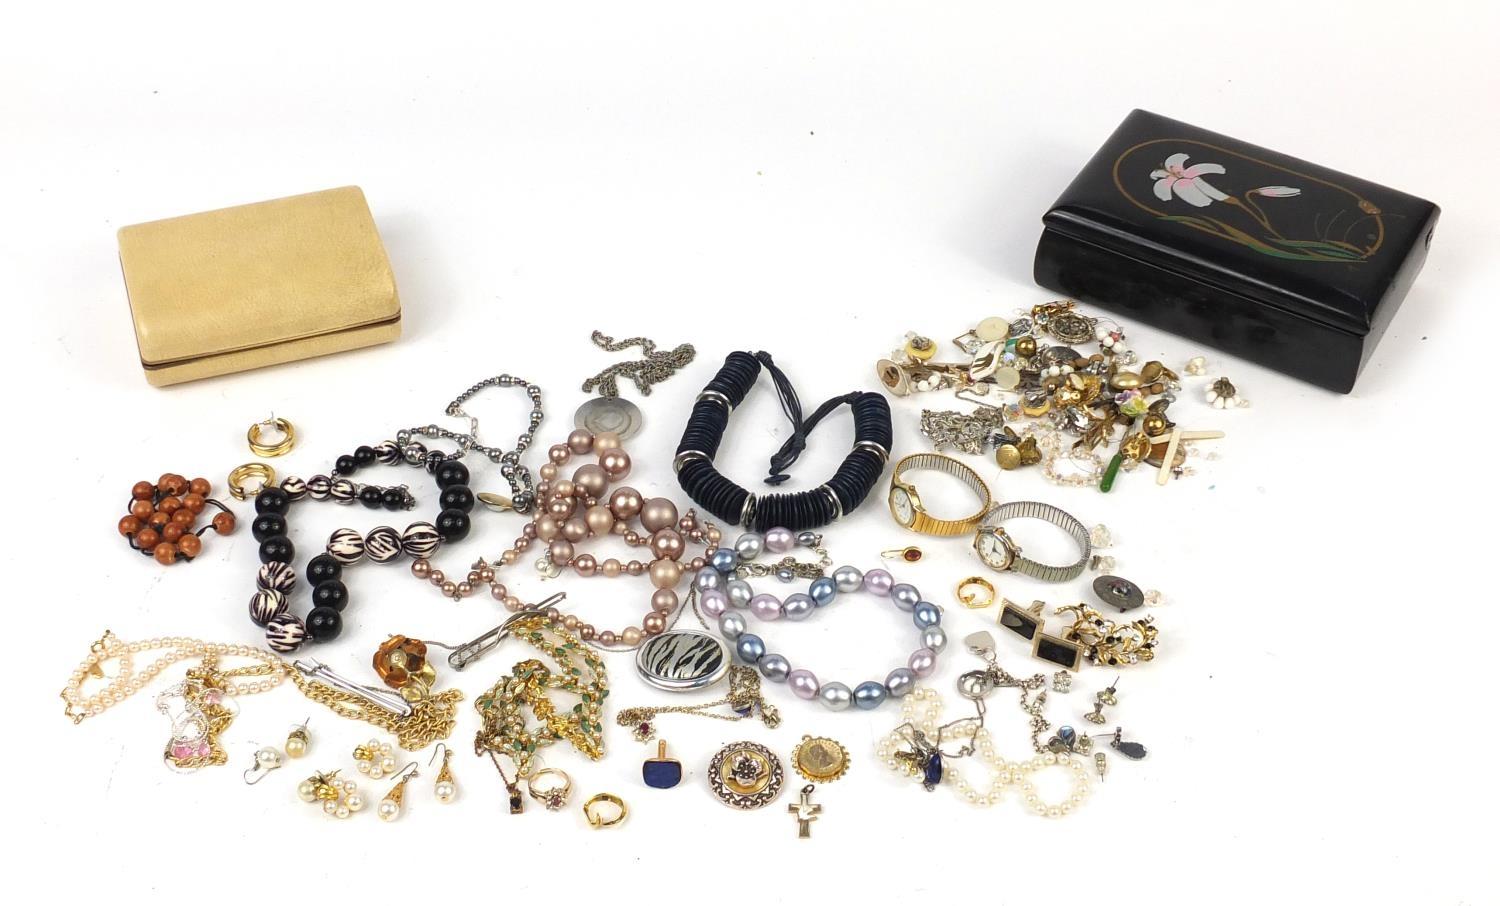 Costume jewellery including brooches, necklaces and earrings, housed in two jewellery boxes : For